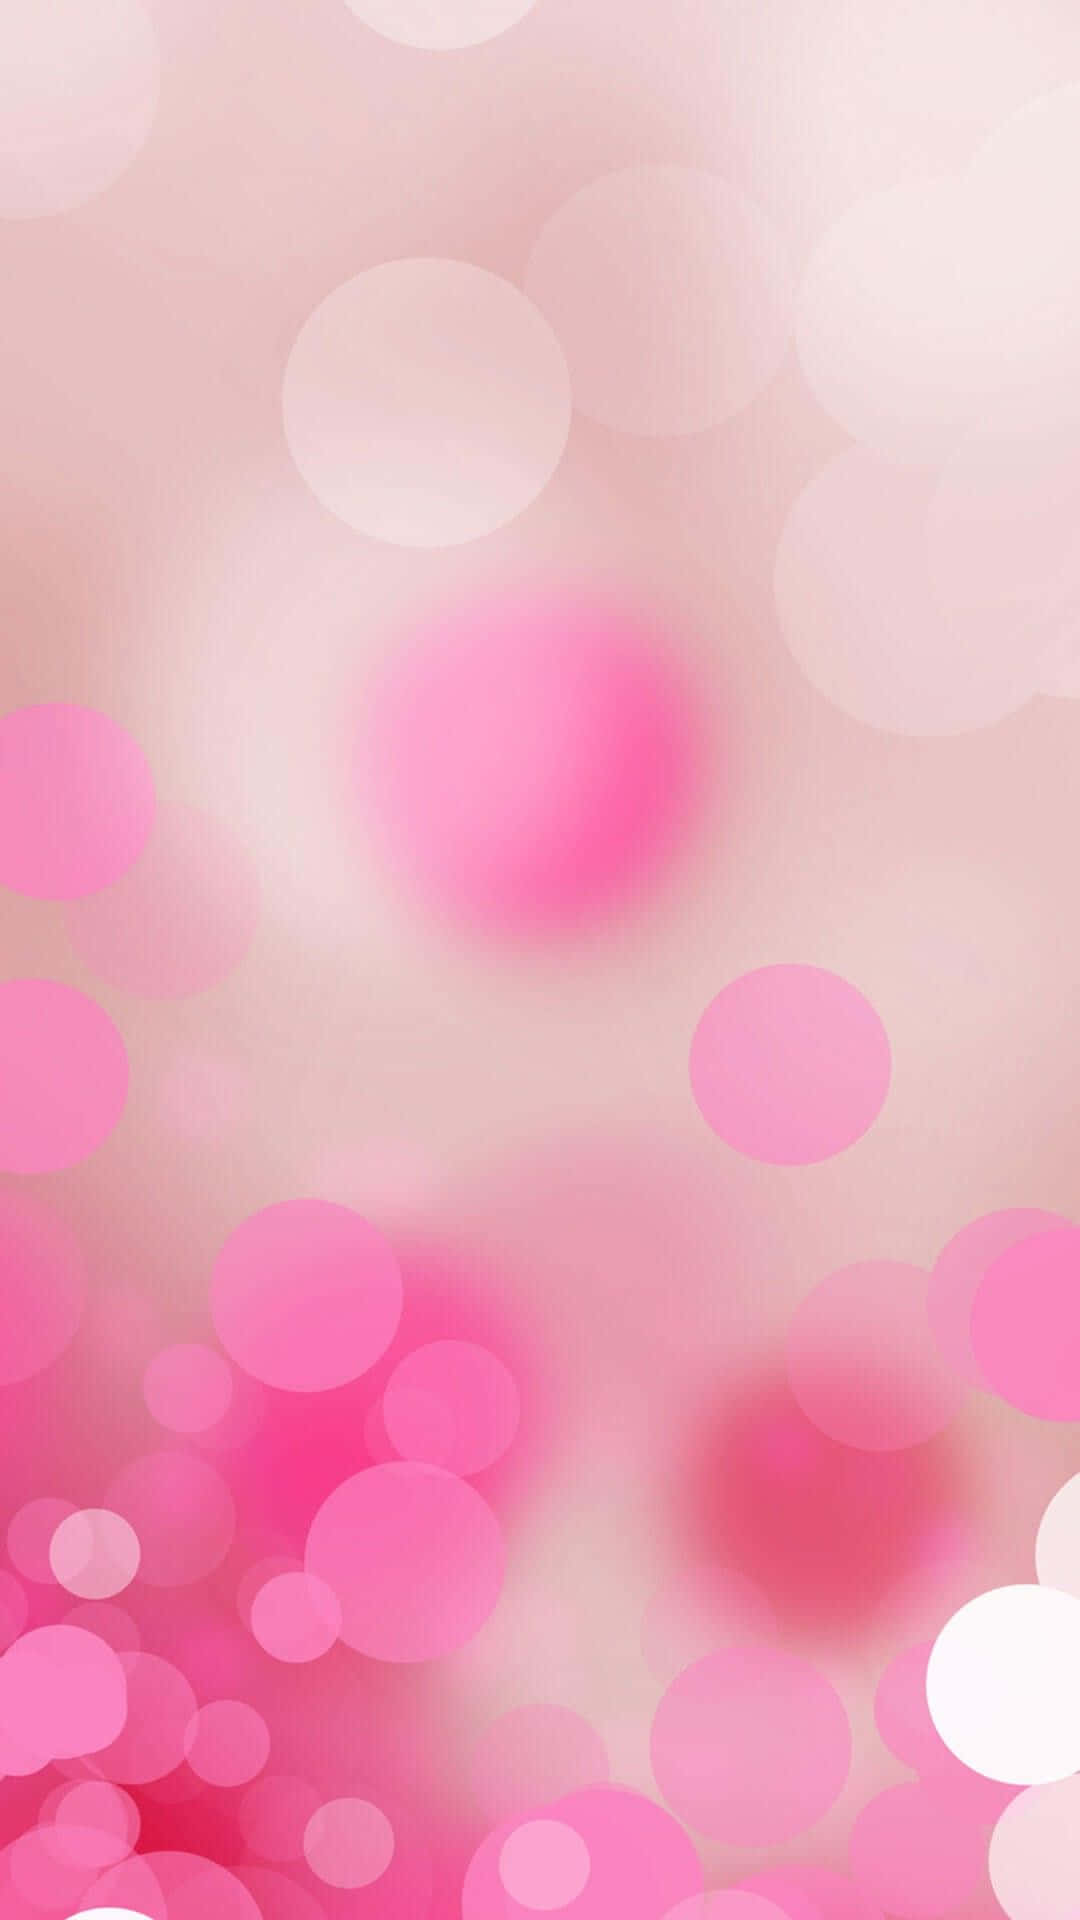 Download Cute Girly 1080 X 1920 Background | Wallpapers.com